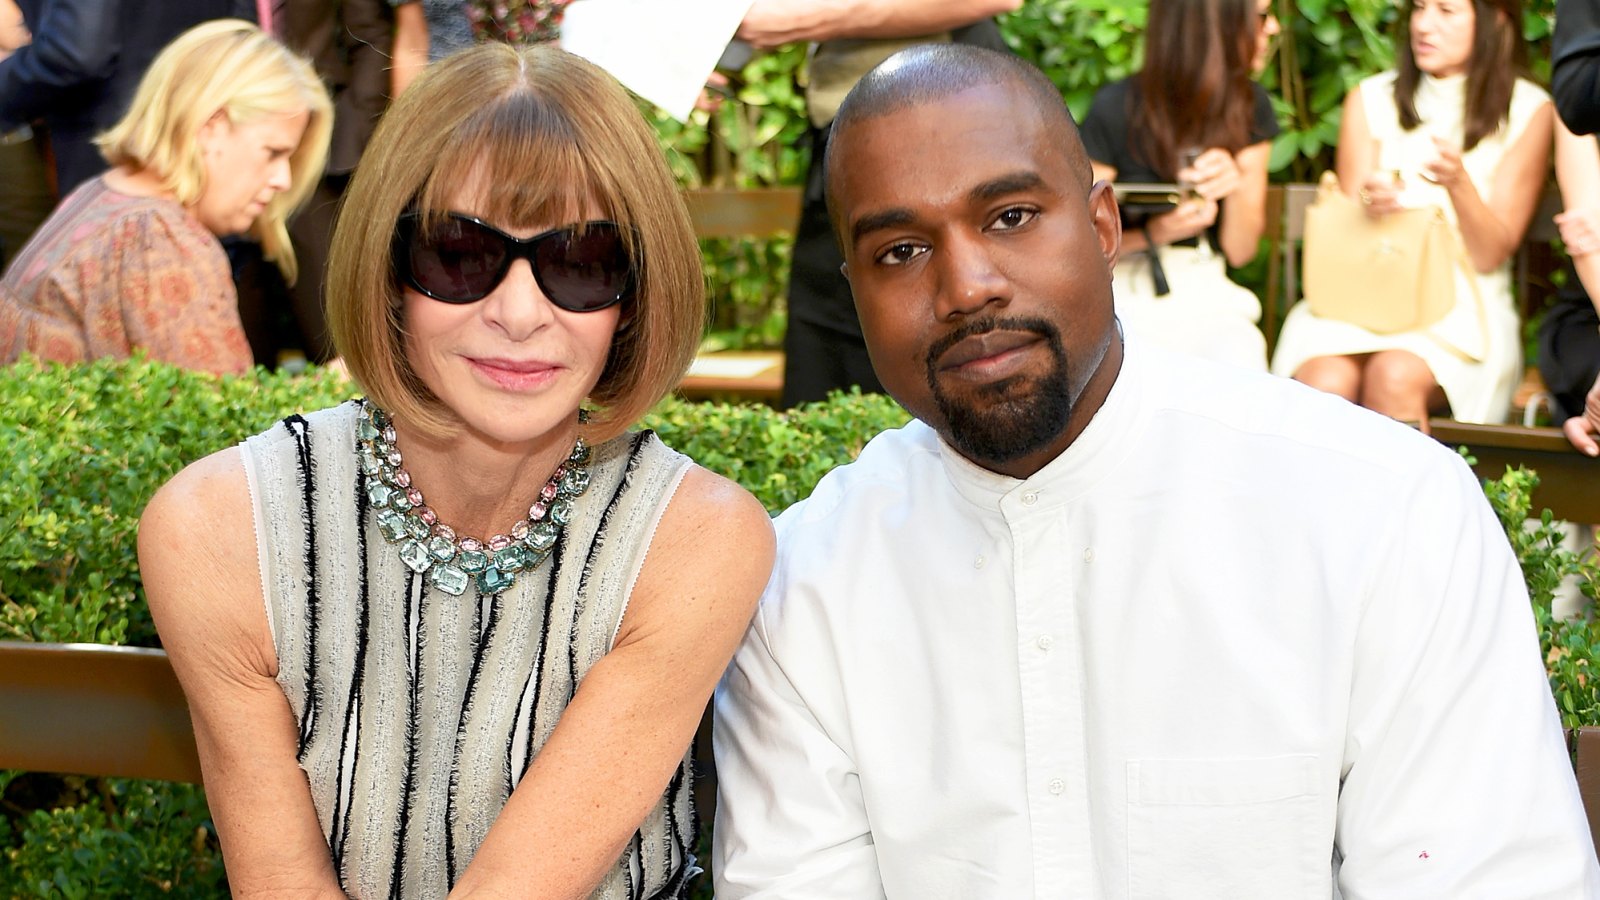 Anna Wintour and Kanye West